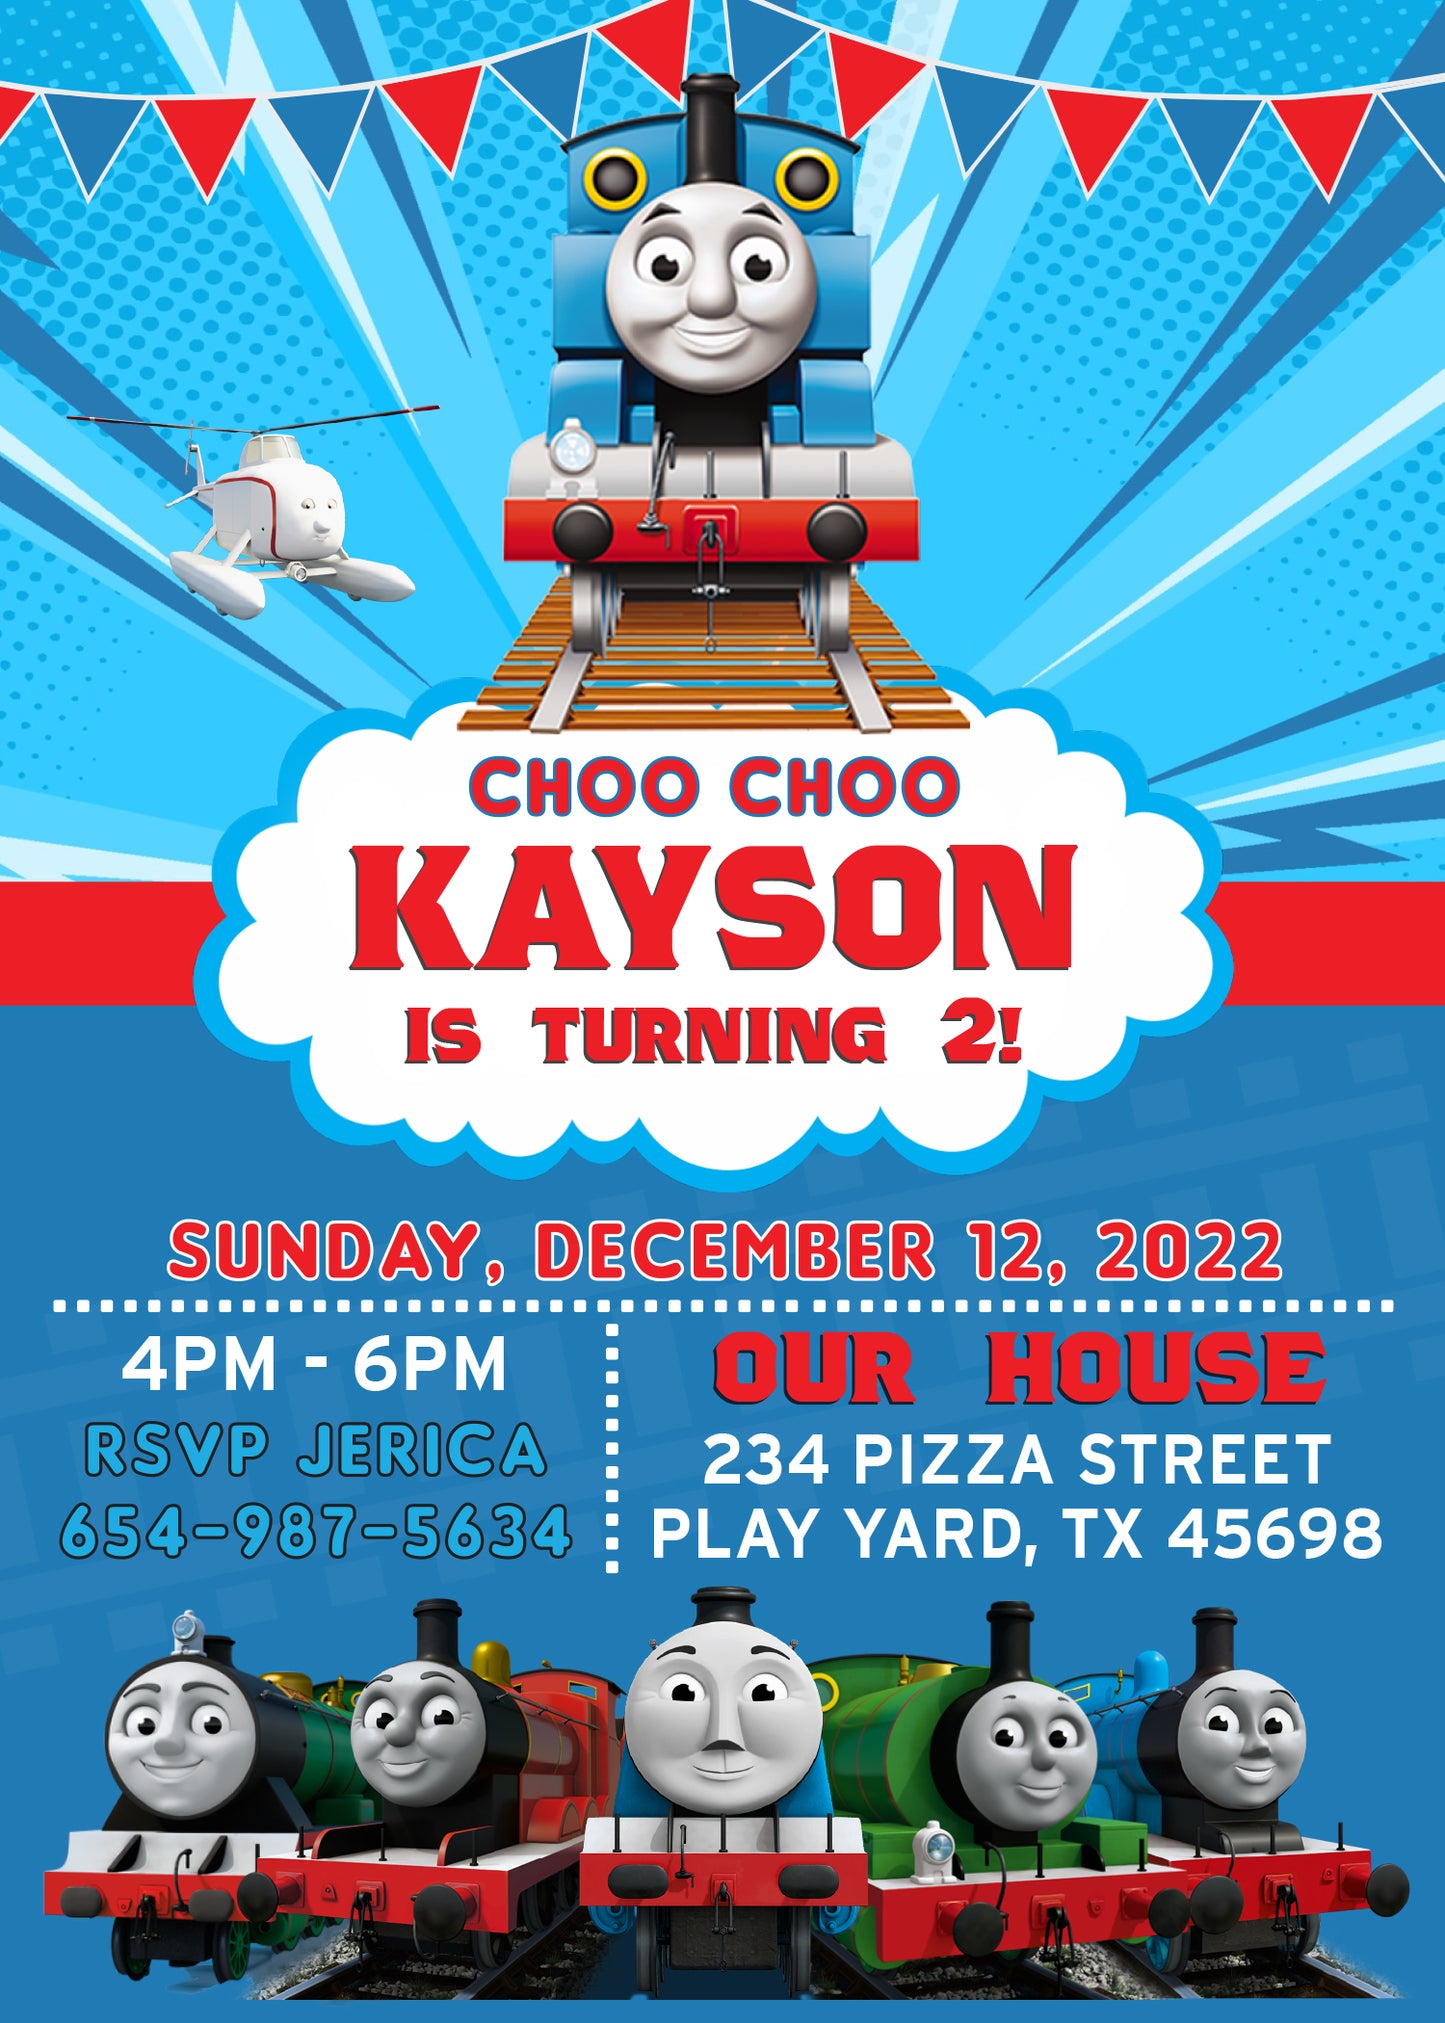 THOMAS THE TRAIN Birthday Party Invitation with or without Photo - Printed or Digital File!